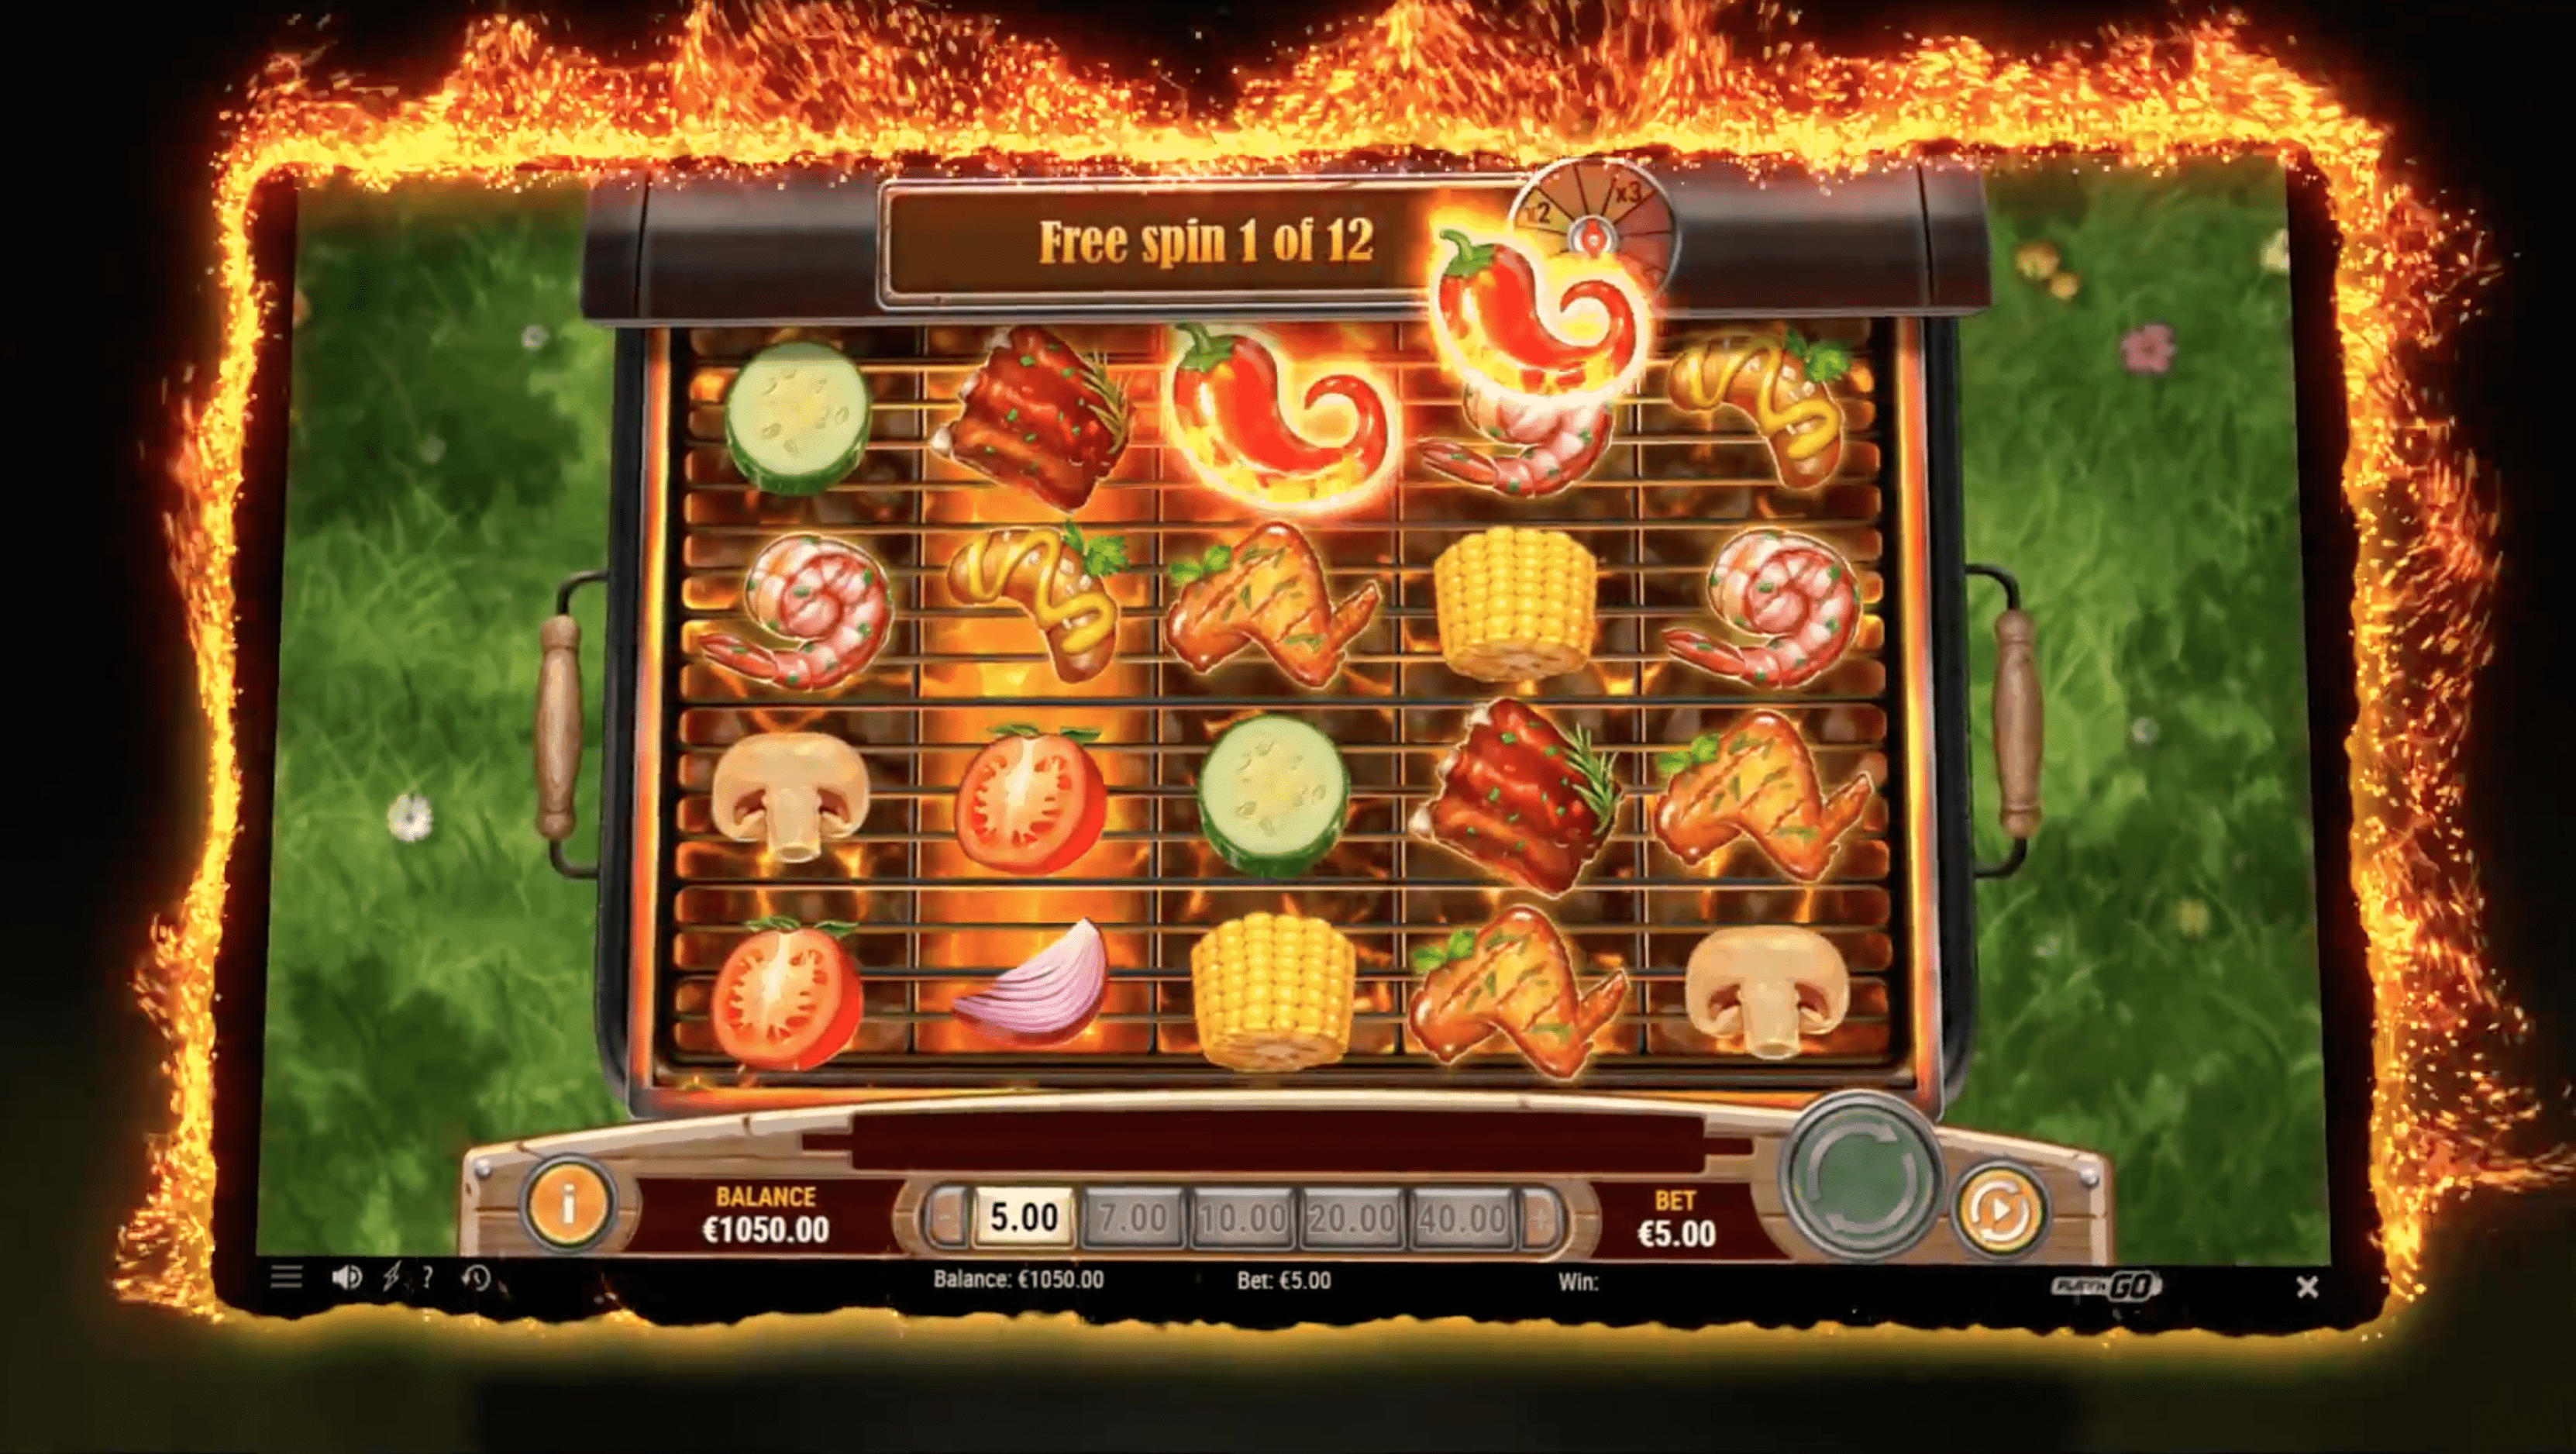 Play'n GO - Sizzling Spins